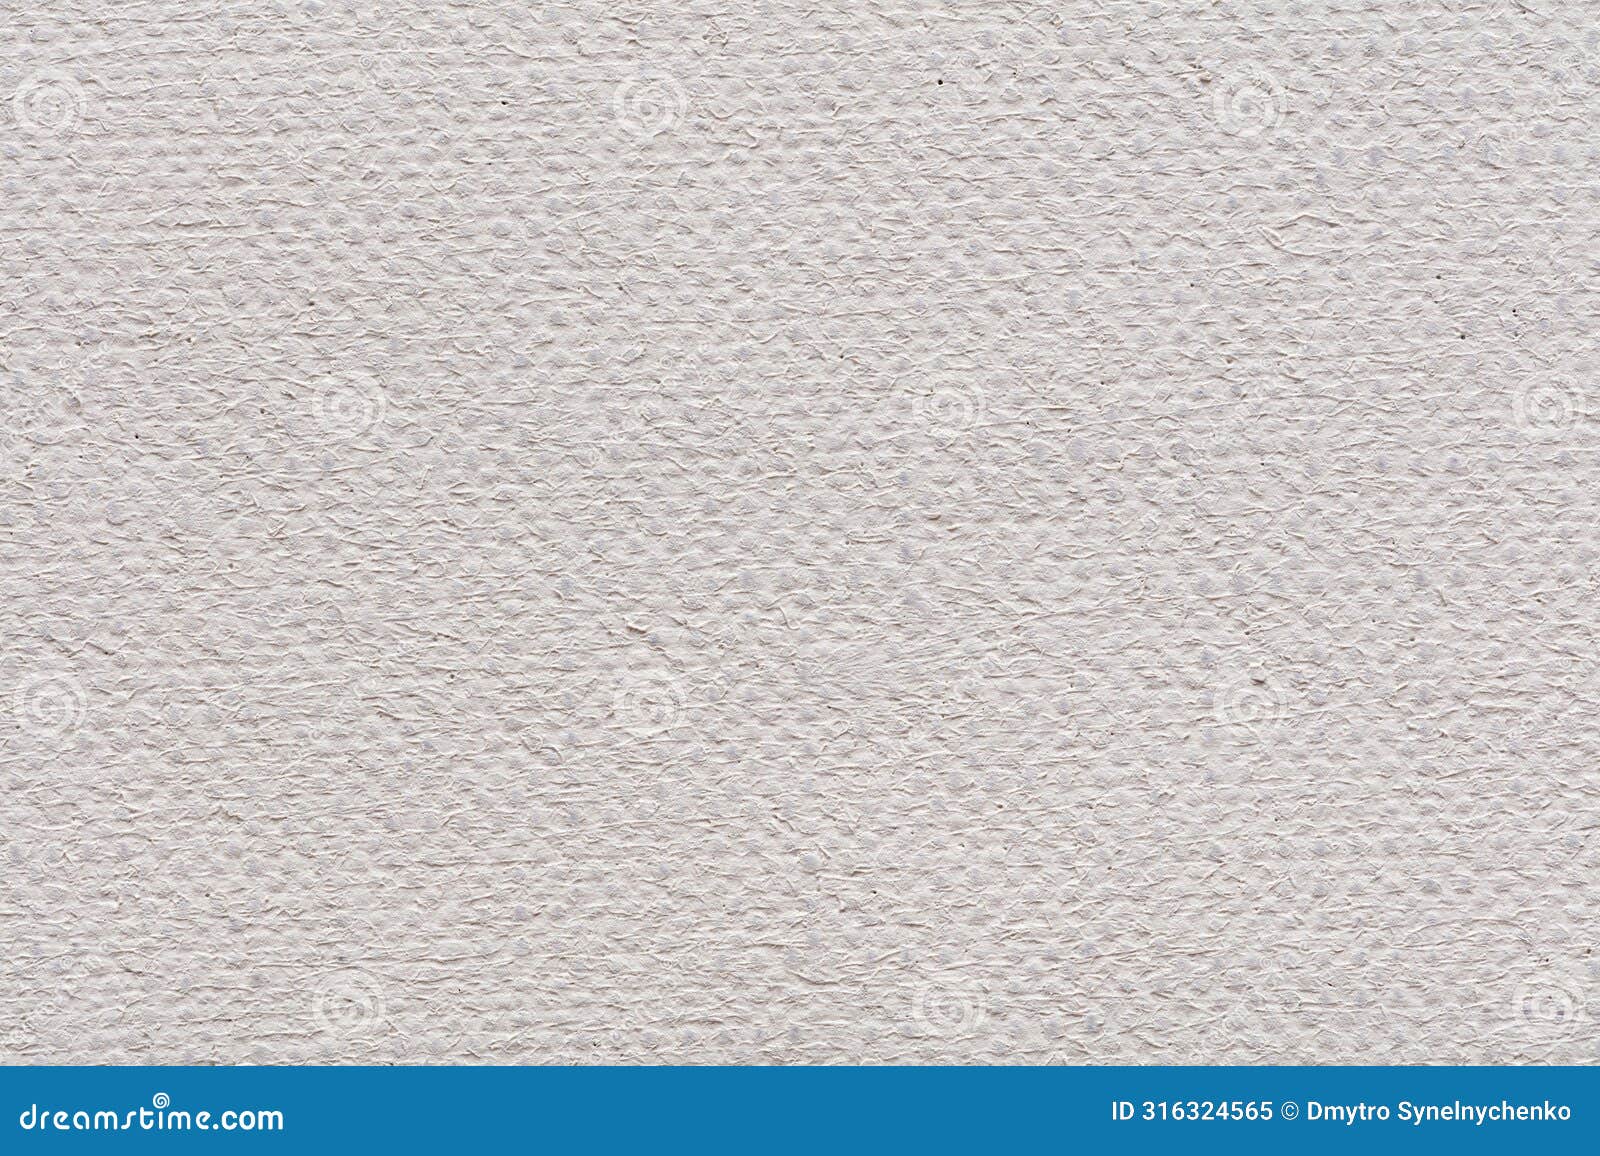 linen canvas texture in white color, part of creative work.